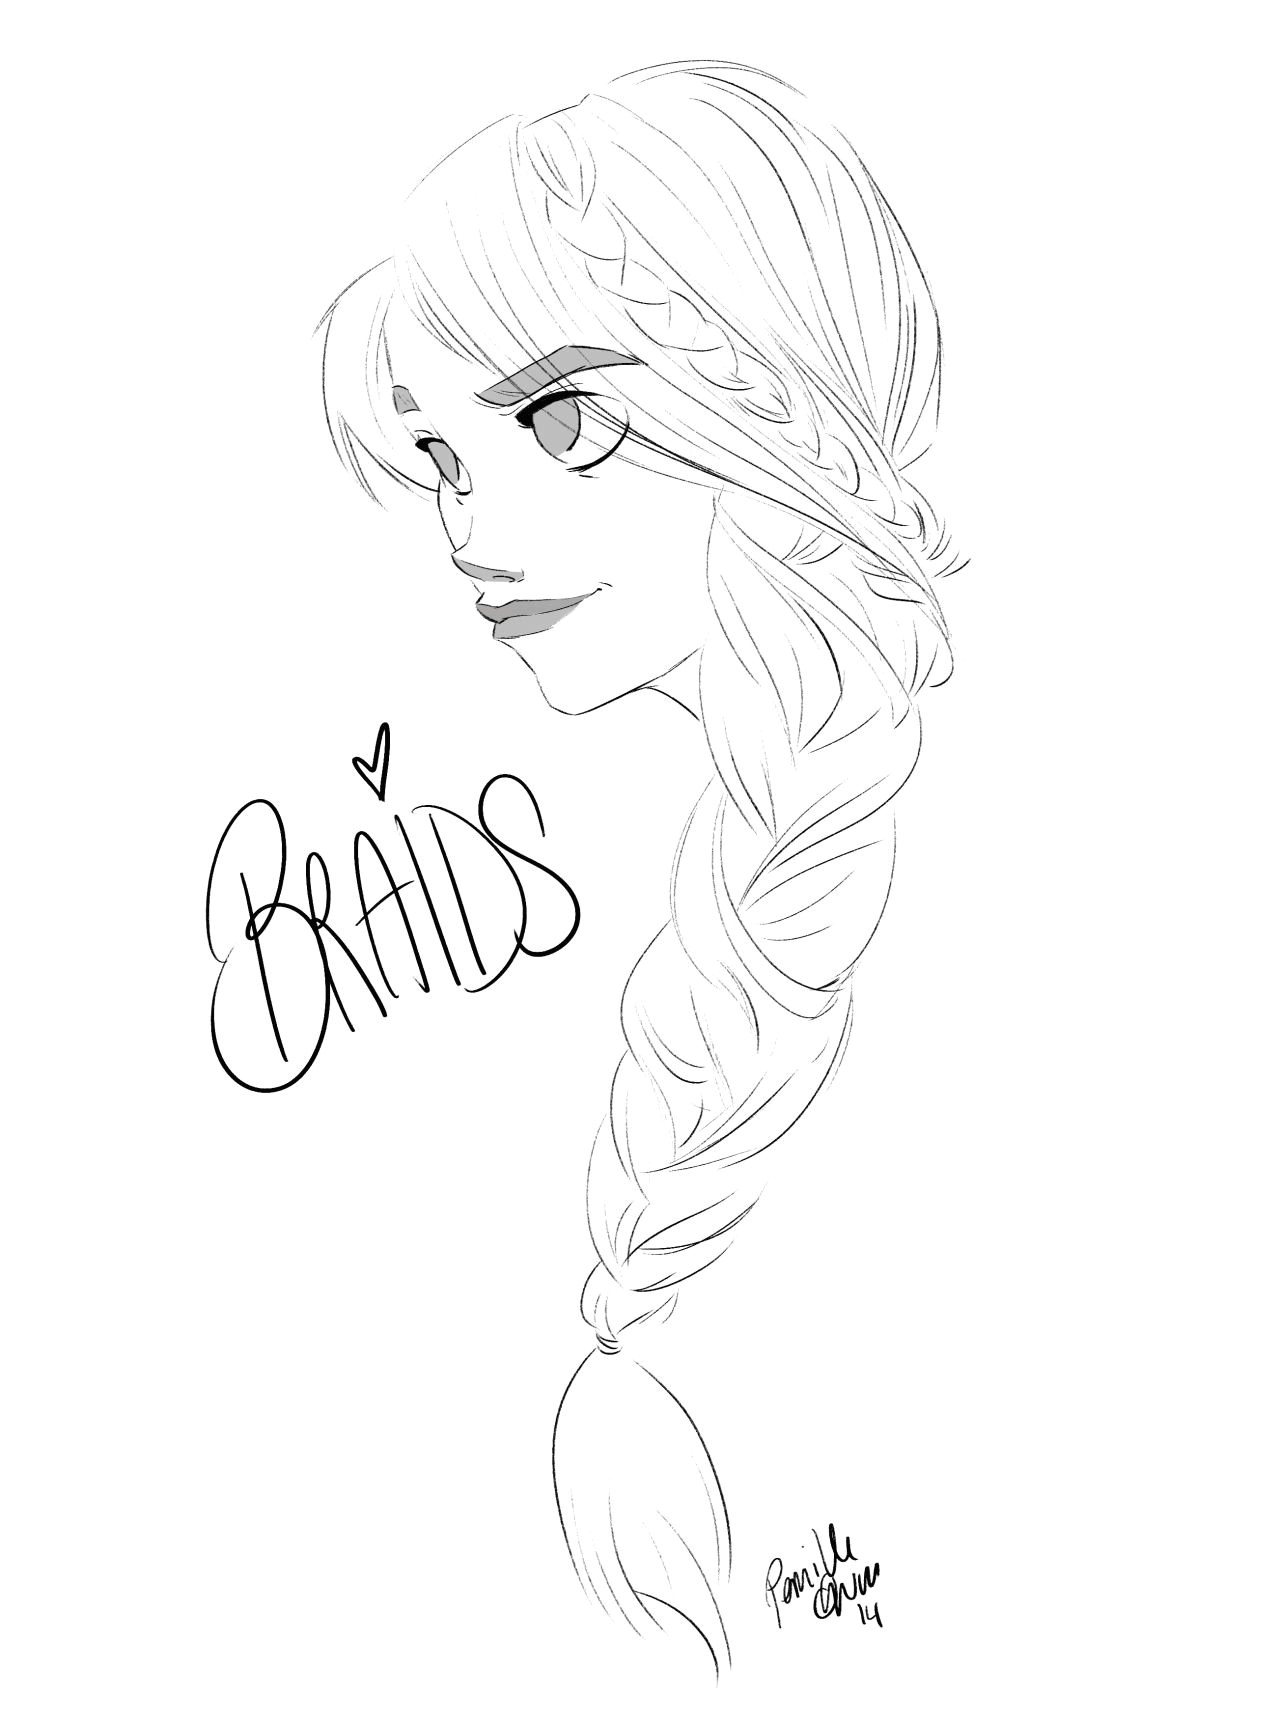 Drawing Things Shop today S Warmup I Have A Thing for Braids at the Moment Art by